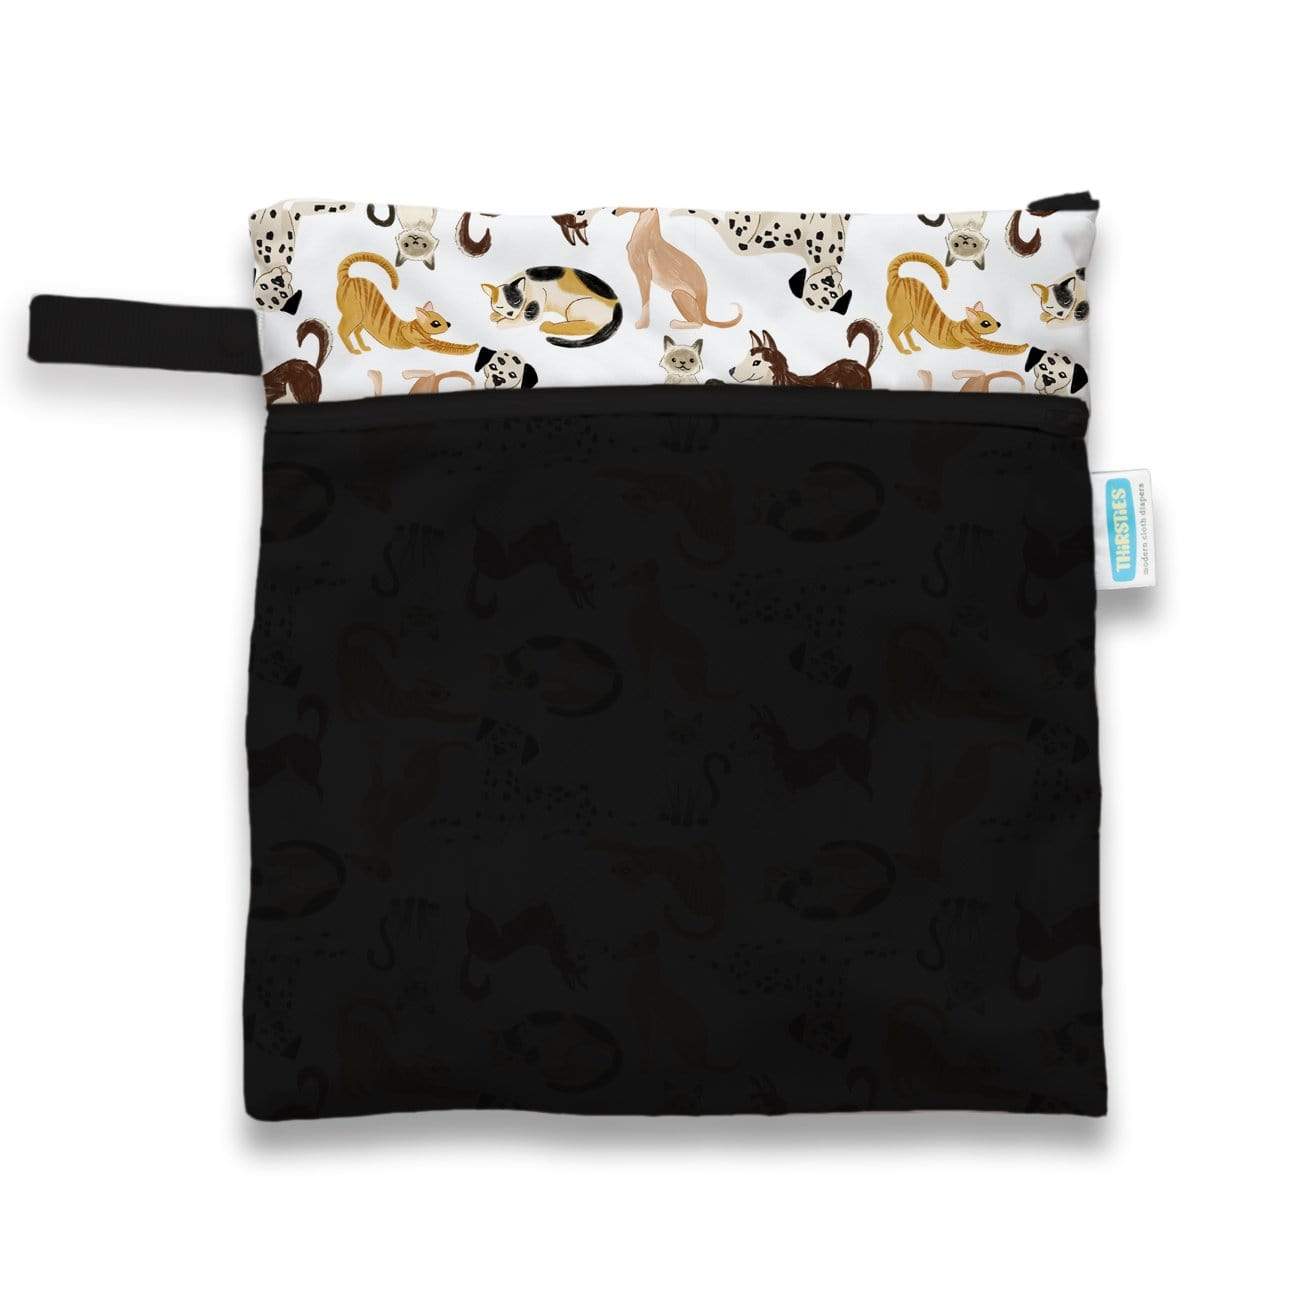 CLEARANCE: Thirsties Wet/Dry Bag Pawsitive Pals